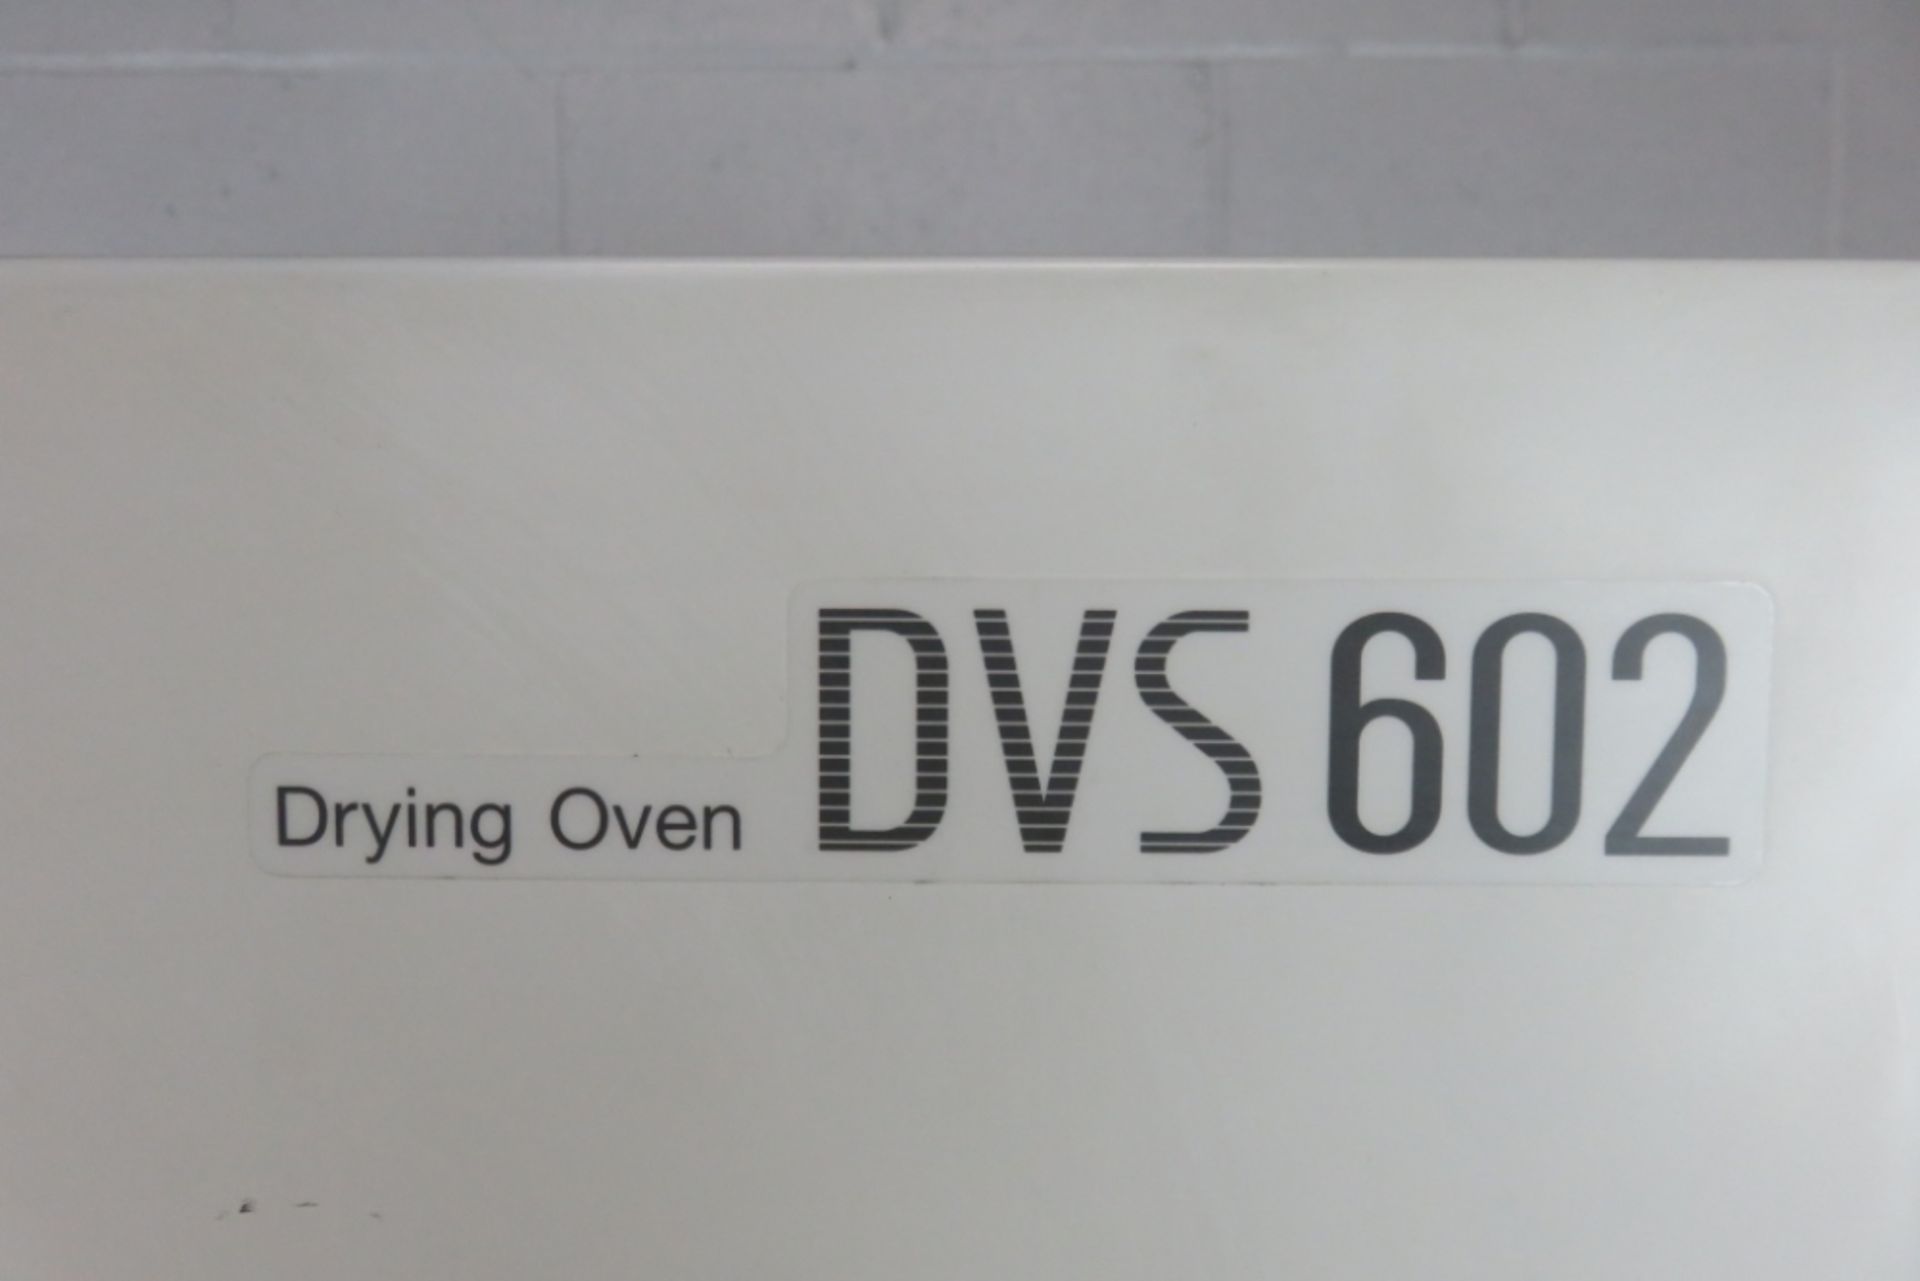 Yamato DVS602 Natural Convection Oven - Image 6 of 7